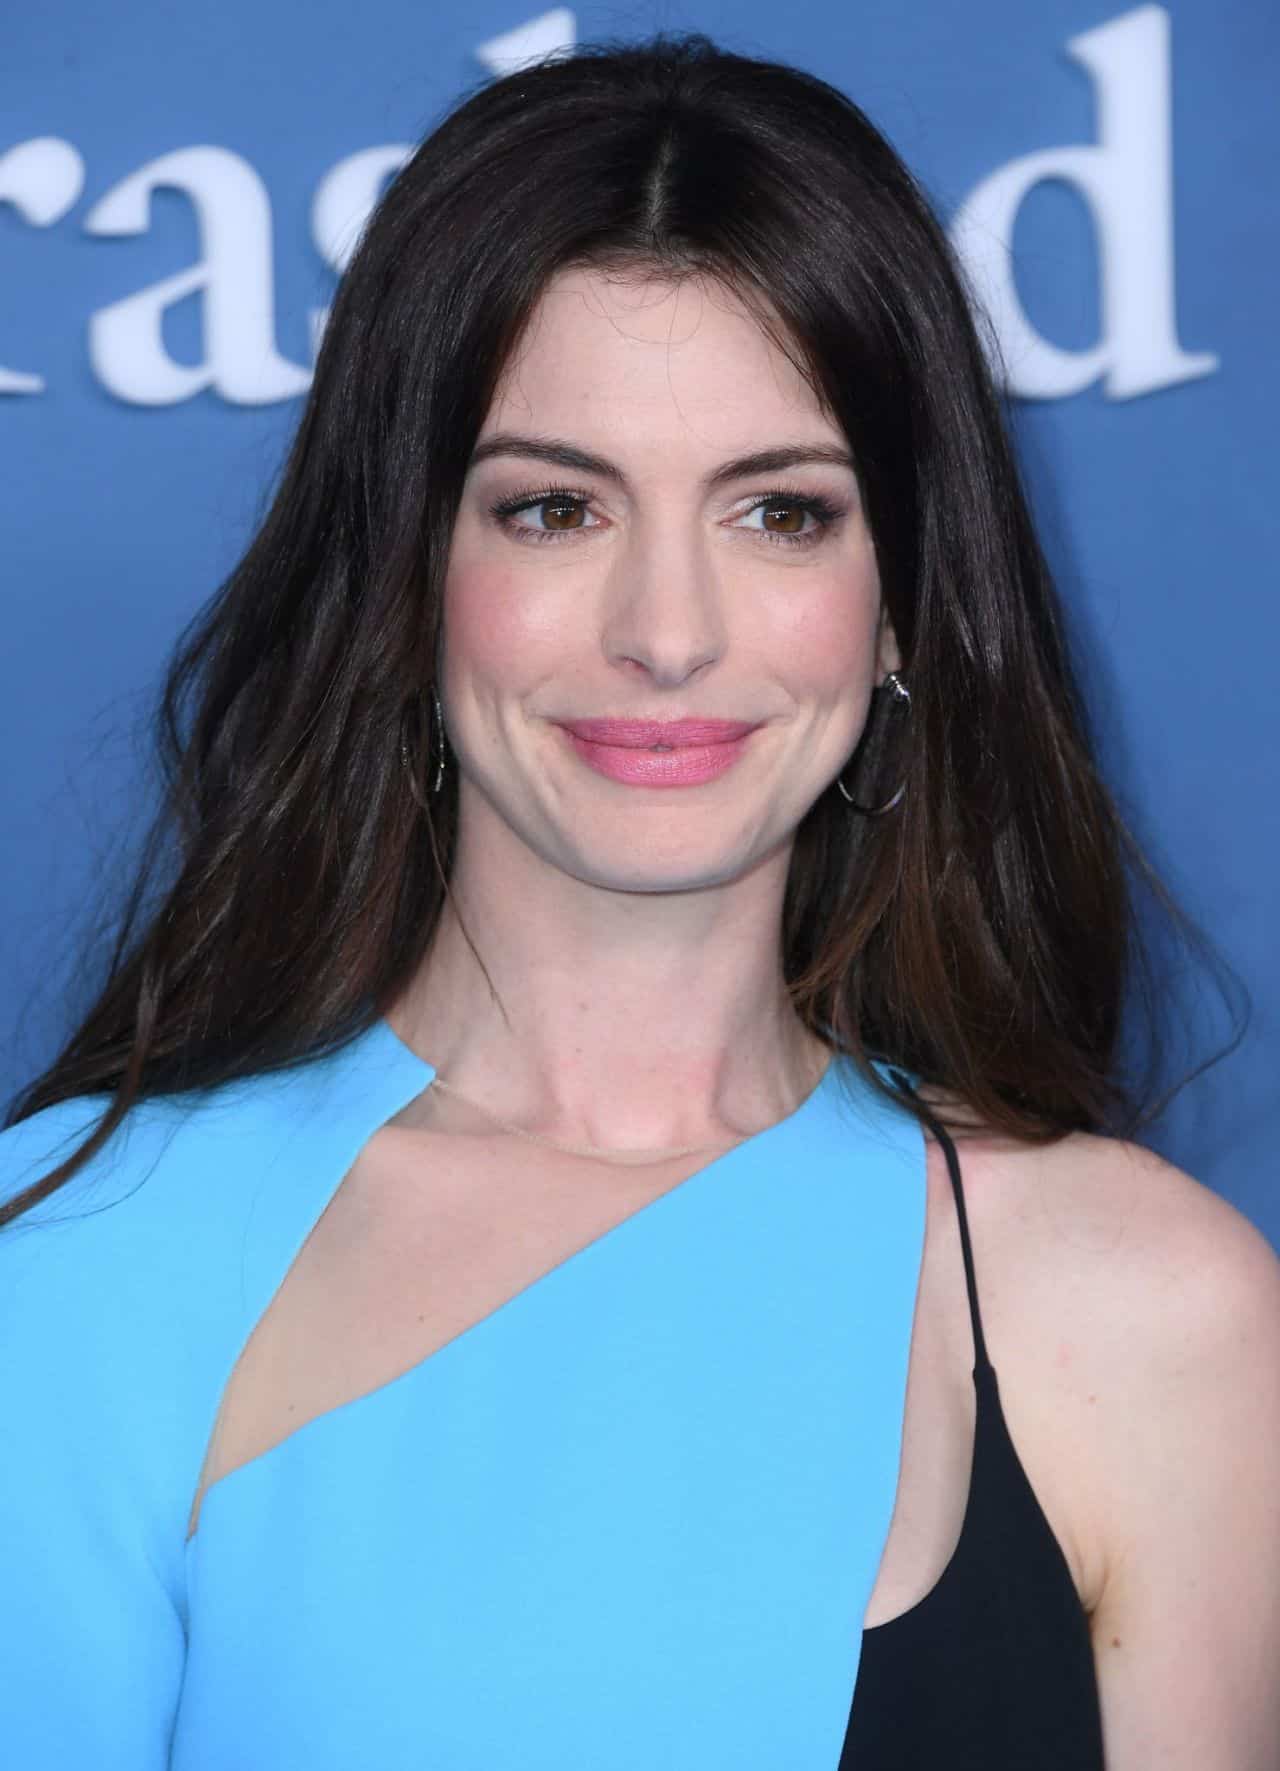 Anne Hathaway Wore a Daring Blue Dress at the WeCrashed Premiere in LA